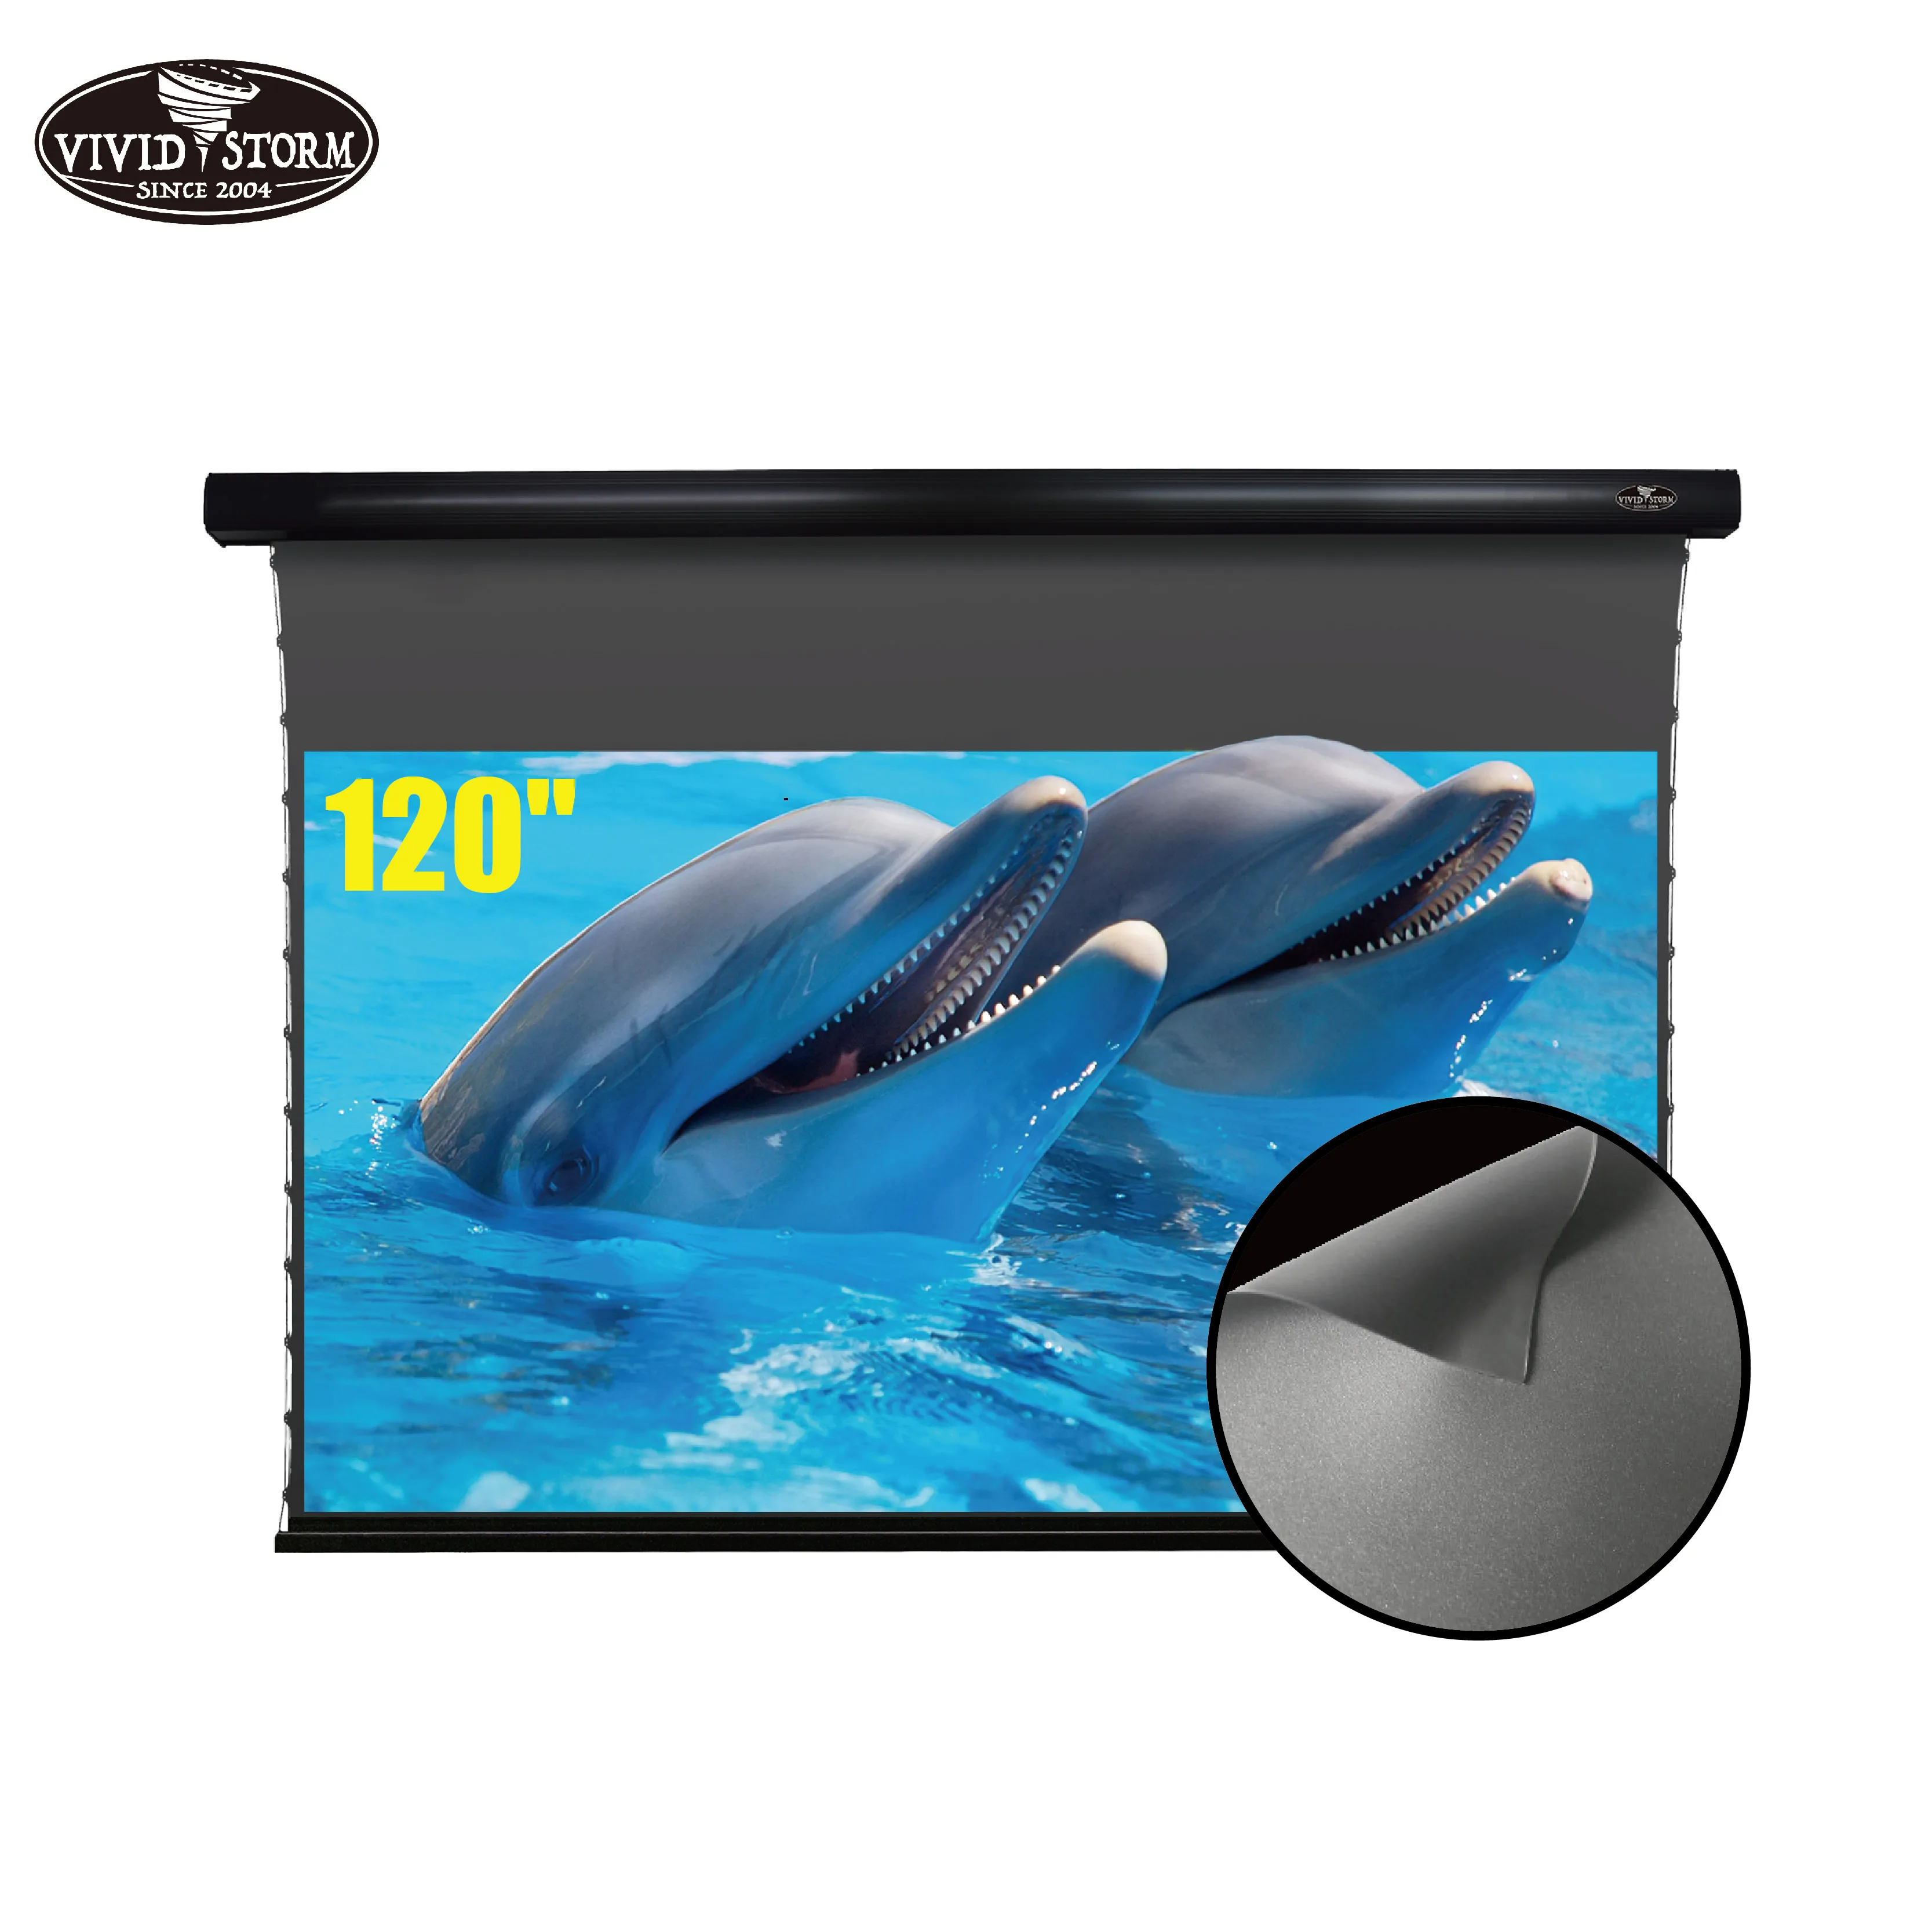 

VIVIDSTORM 120 inch Slimline Electric Tab-tensioned pull down obsidian long throw ambient light rejecting screen material 4k hd